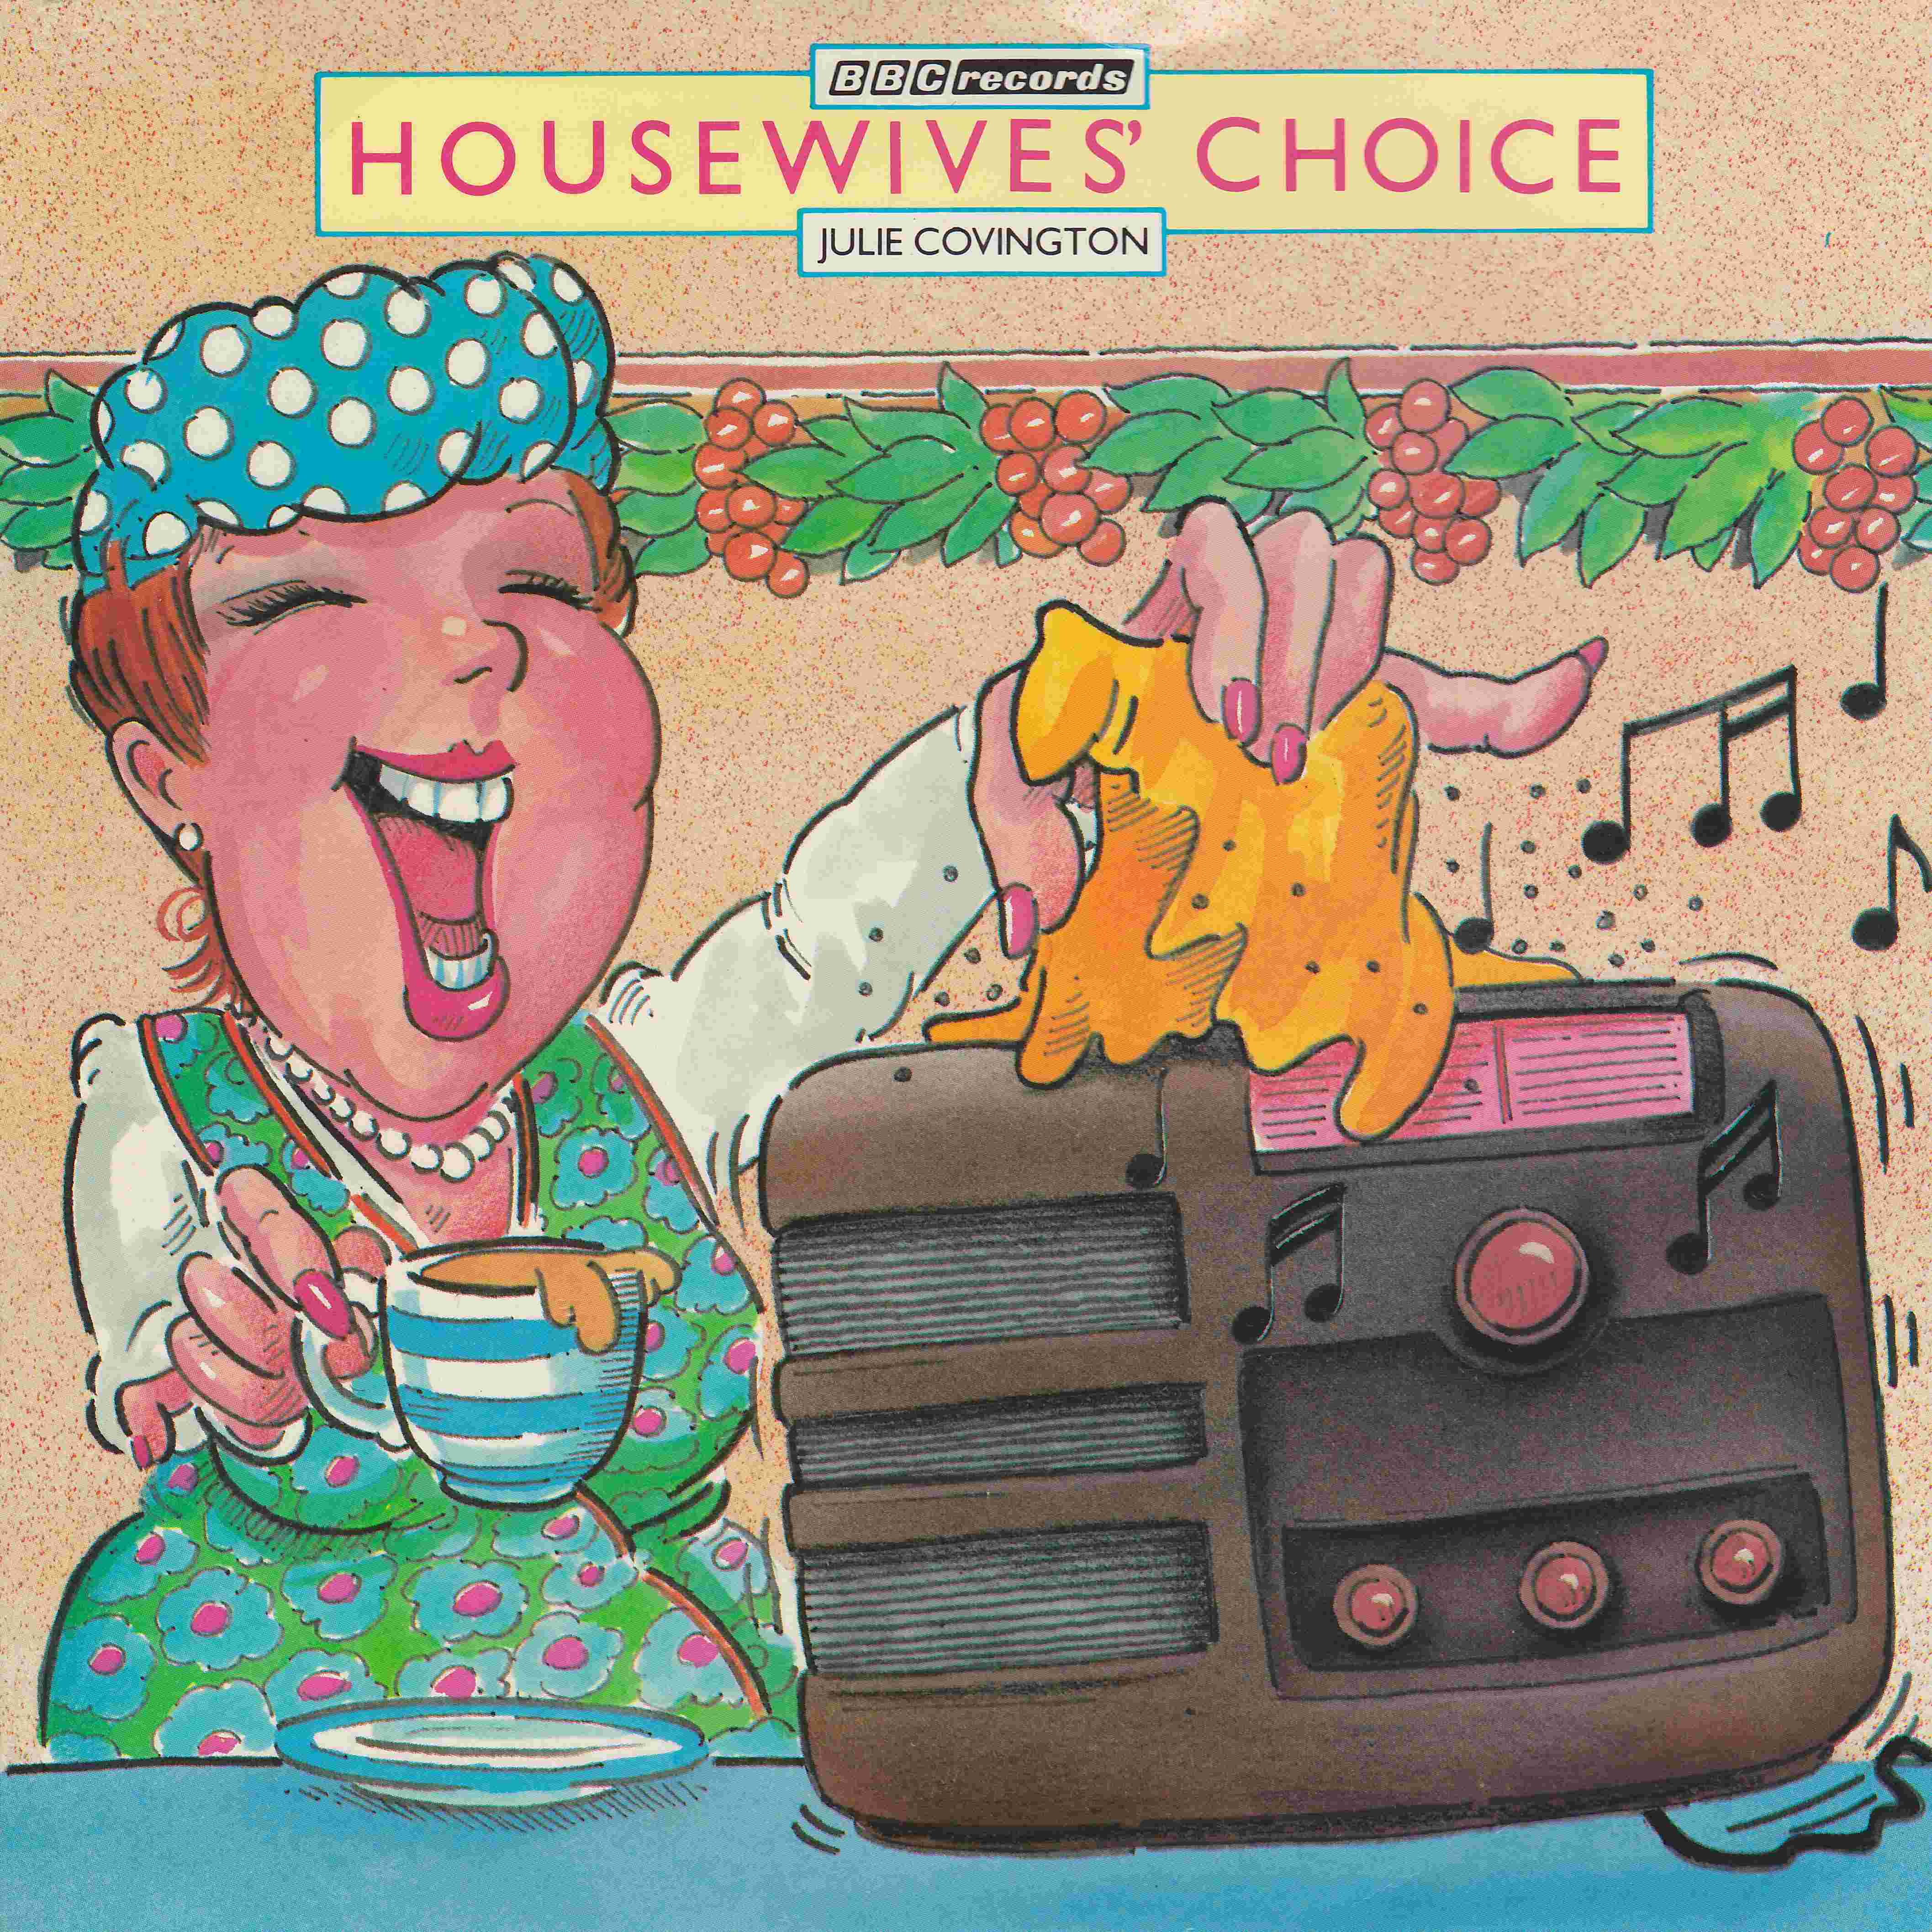 Picture of RESL 123 In party mood (Housewives' choice) by artist Julie Covington from the BBC records and Tapes library